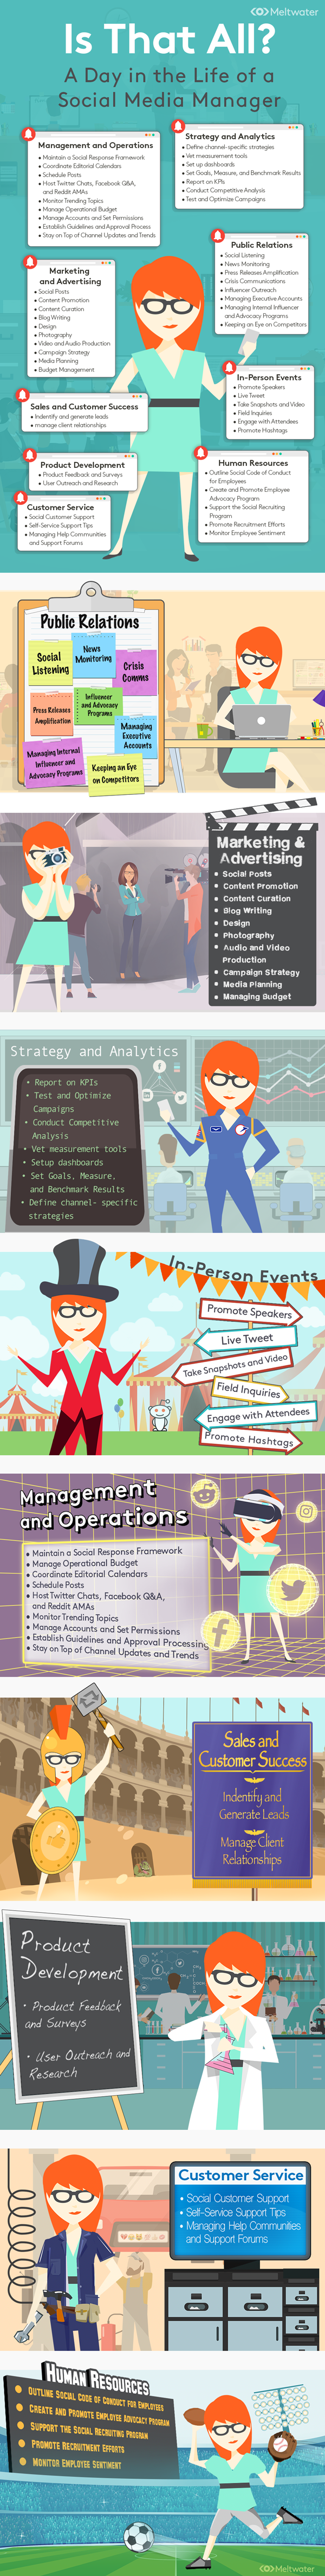 Social media manager infographic